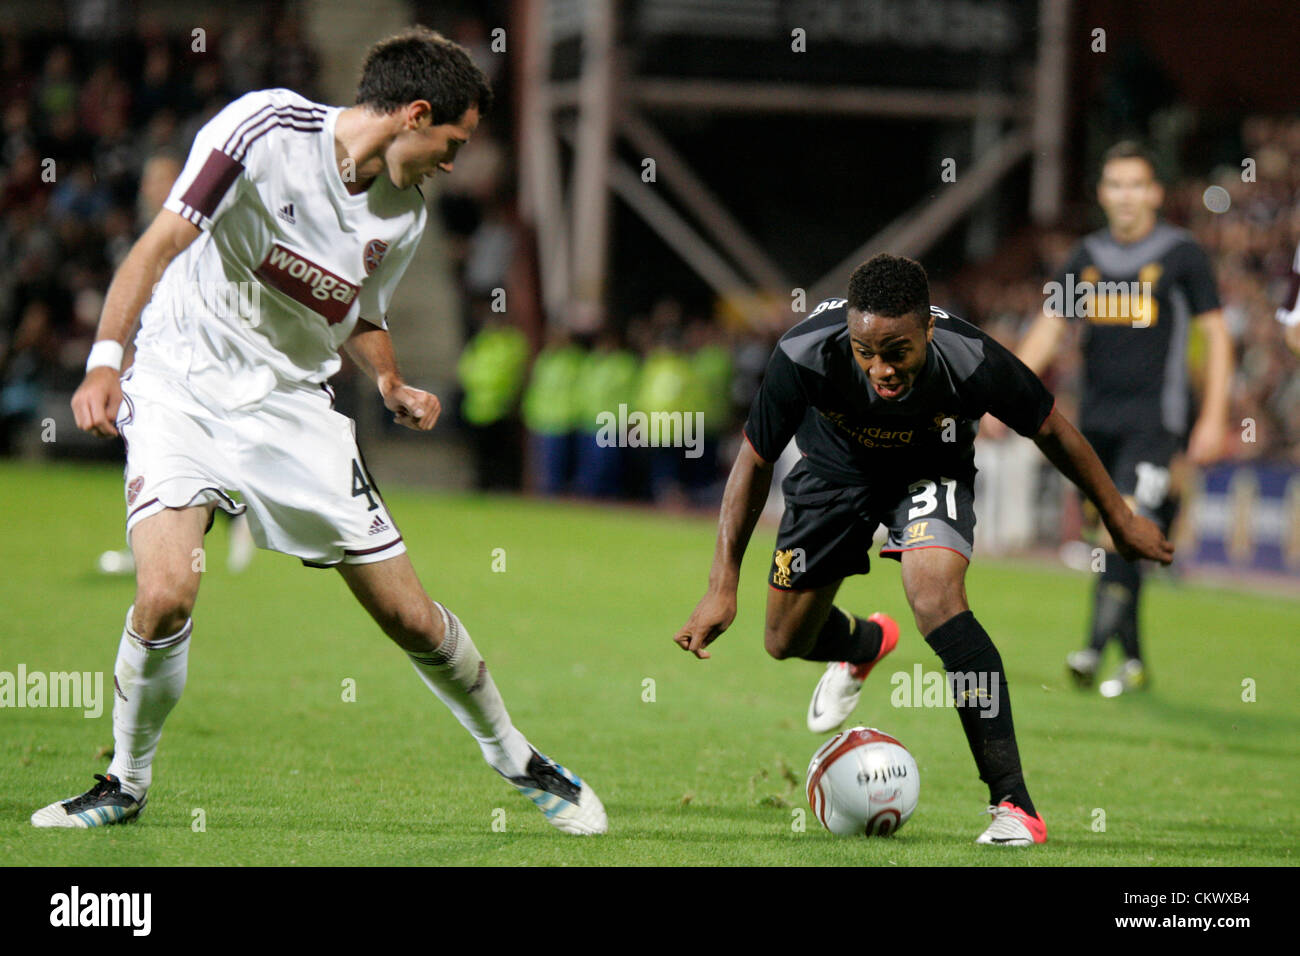 23.08.2012 Edinburgh, Scotland. 31. Raheem Sterling and 4 Ryan McGowan in action during the Europa League Qualifying 1st leg tie between Hearts and Liverpool from the Tynecastle Stadium. Hearts lost 0-1 to an own goal in the first leg. Stock Photo